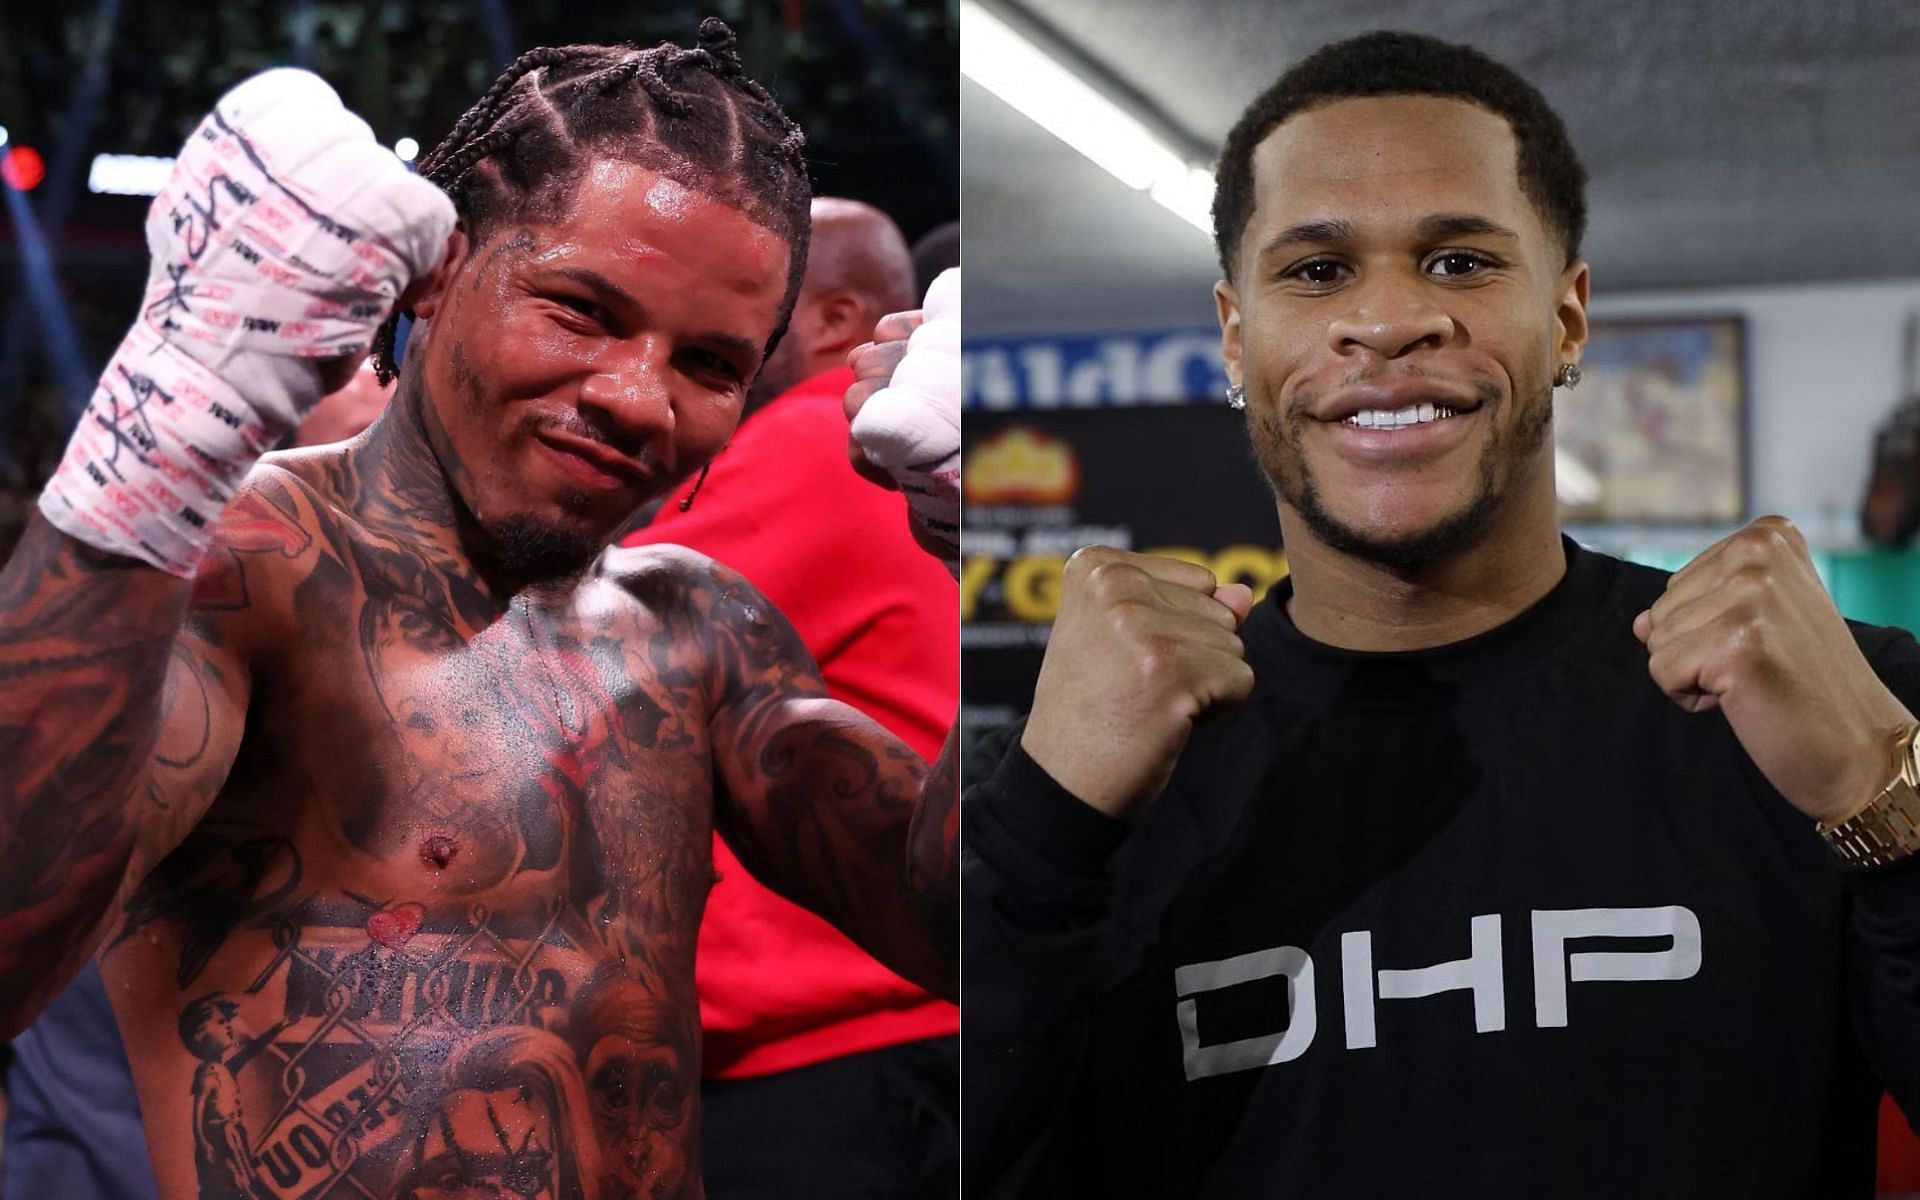 Gervonta Davis (left) tries to cross paths with Devin Haney (right) [Images via Getty]